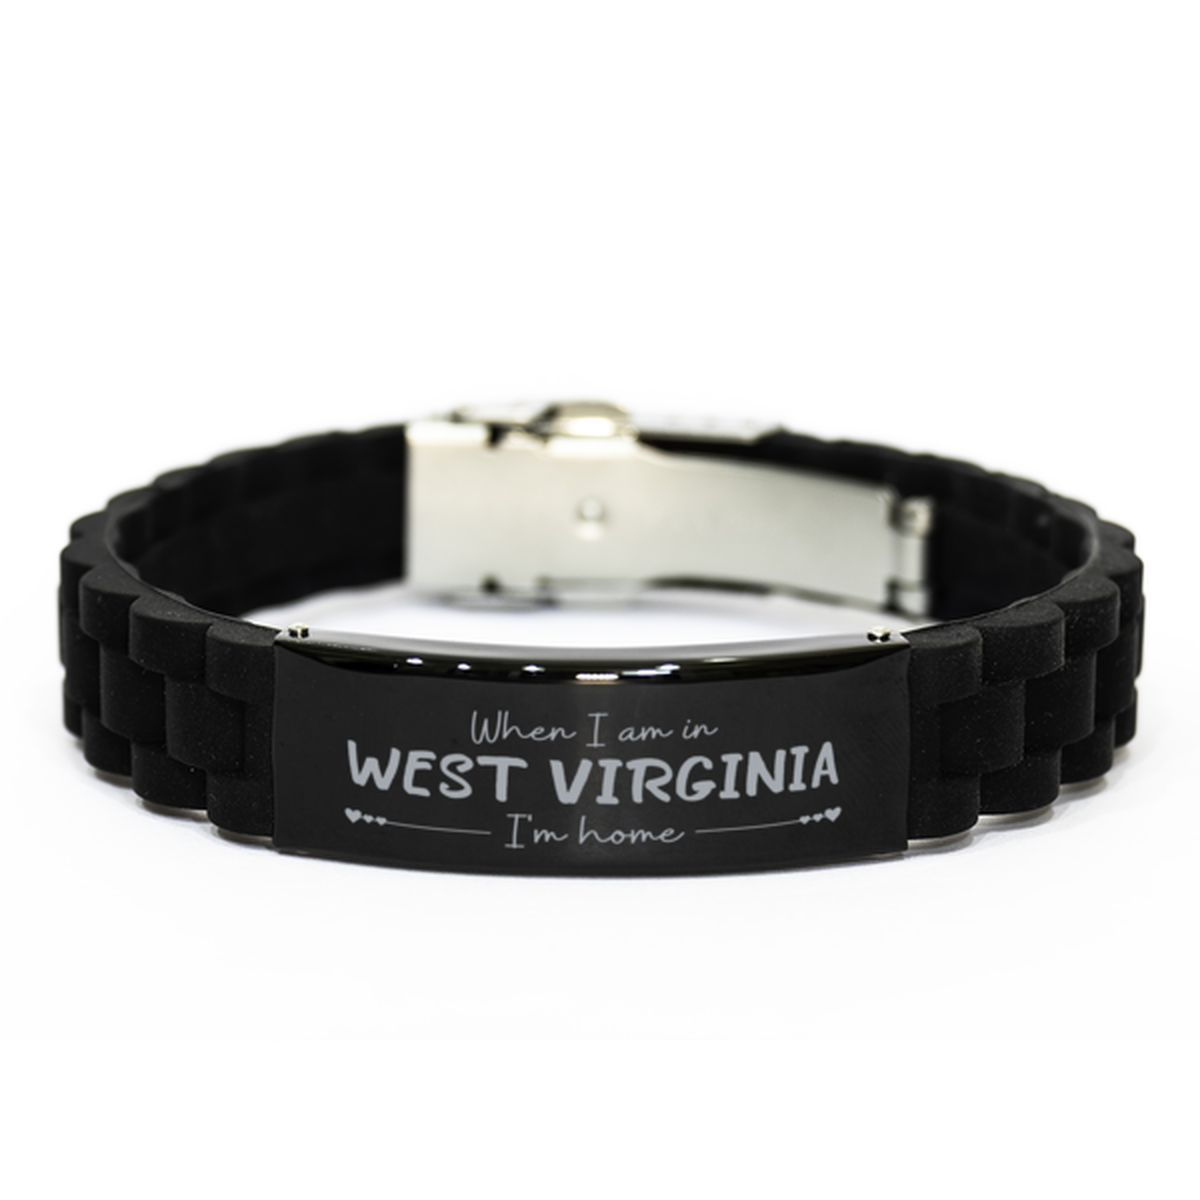 When I am in West Virginia I'm home Black Glidelock Clasp Bracelet, Cheap Gifts For West Virginia, State West Virginia Birthday Gifts for Friends Coworker